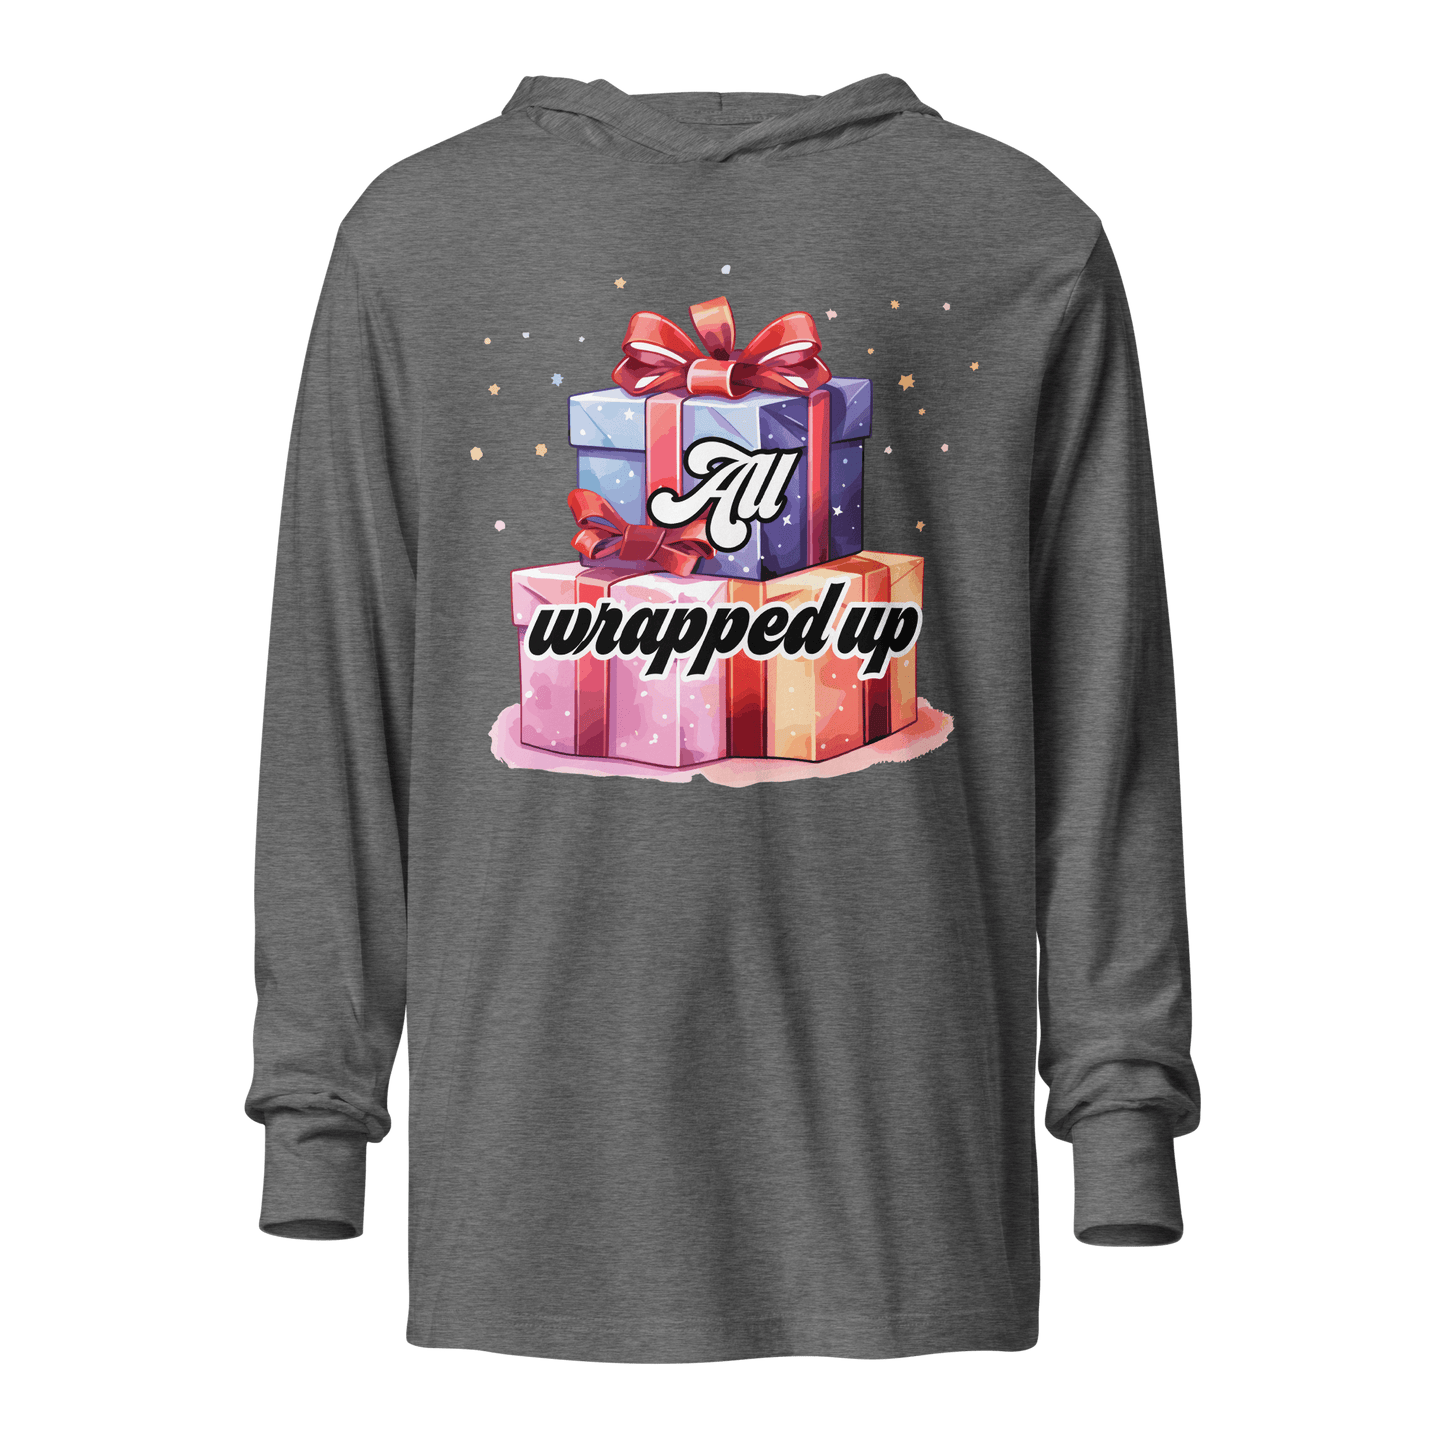 All Wrapped Up Christmas Hooded long-sleeve tee